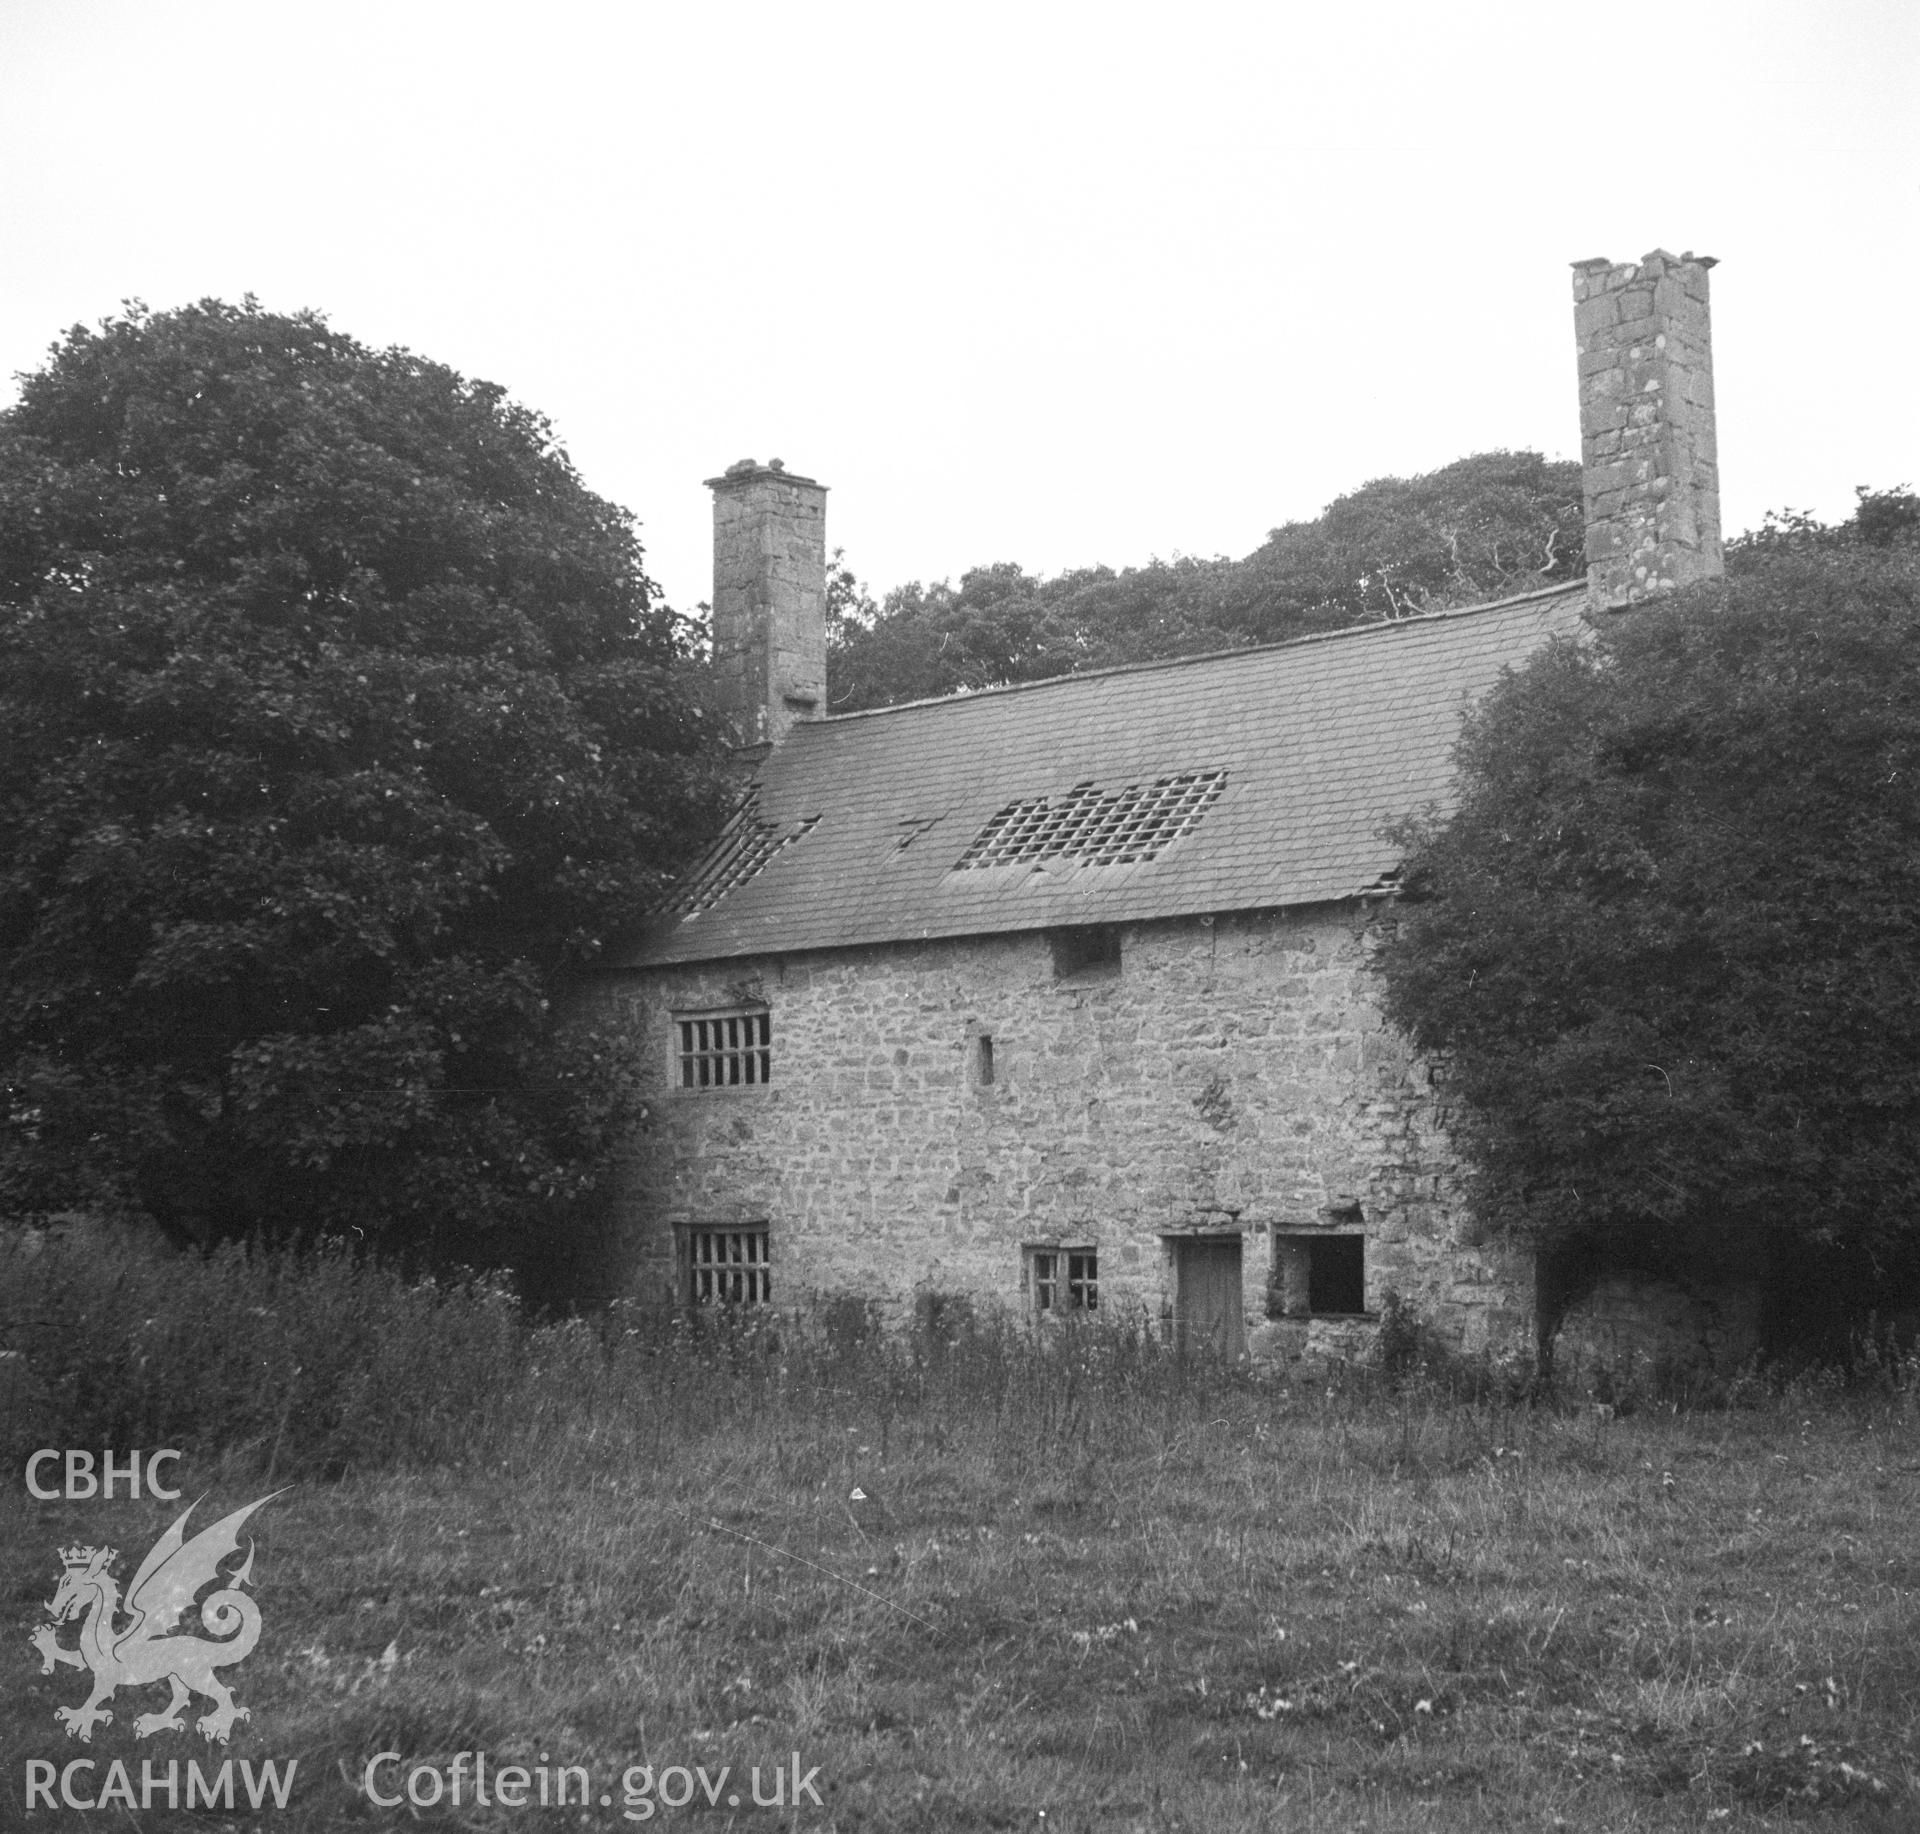 Digital copy of a nitrate negative showing exterior view of Dolauglyder, Denbighshire.